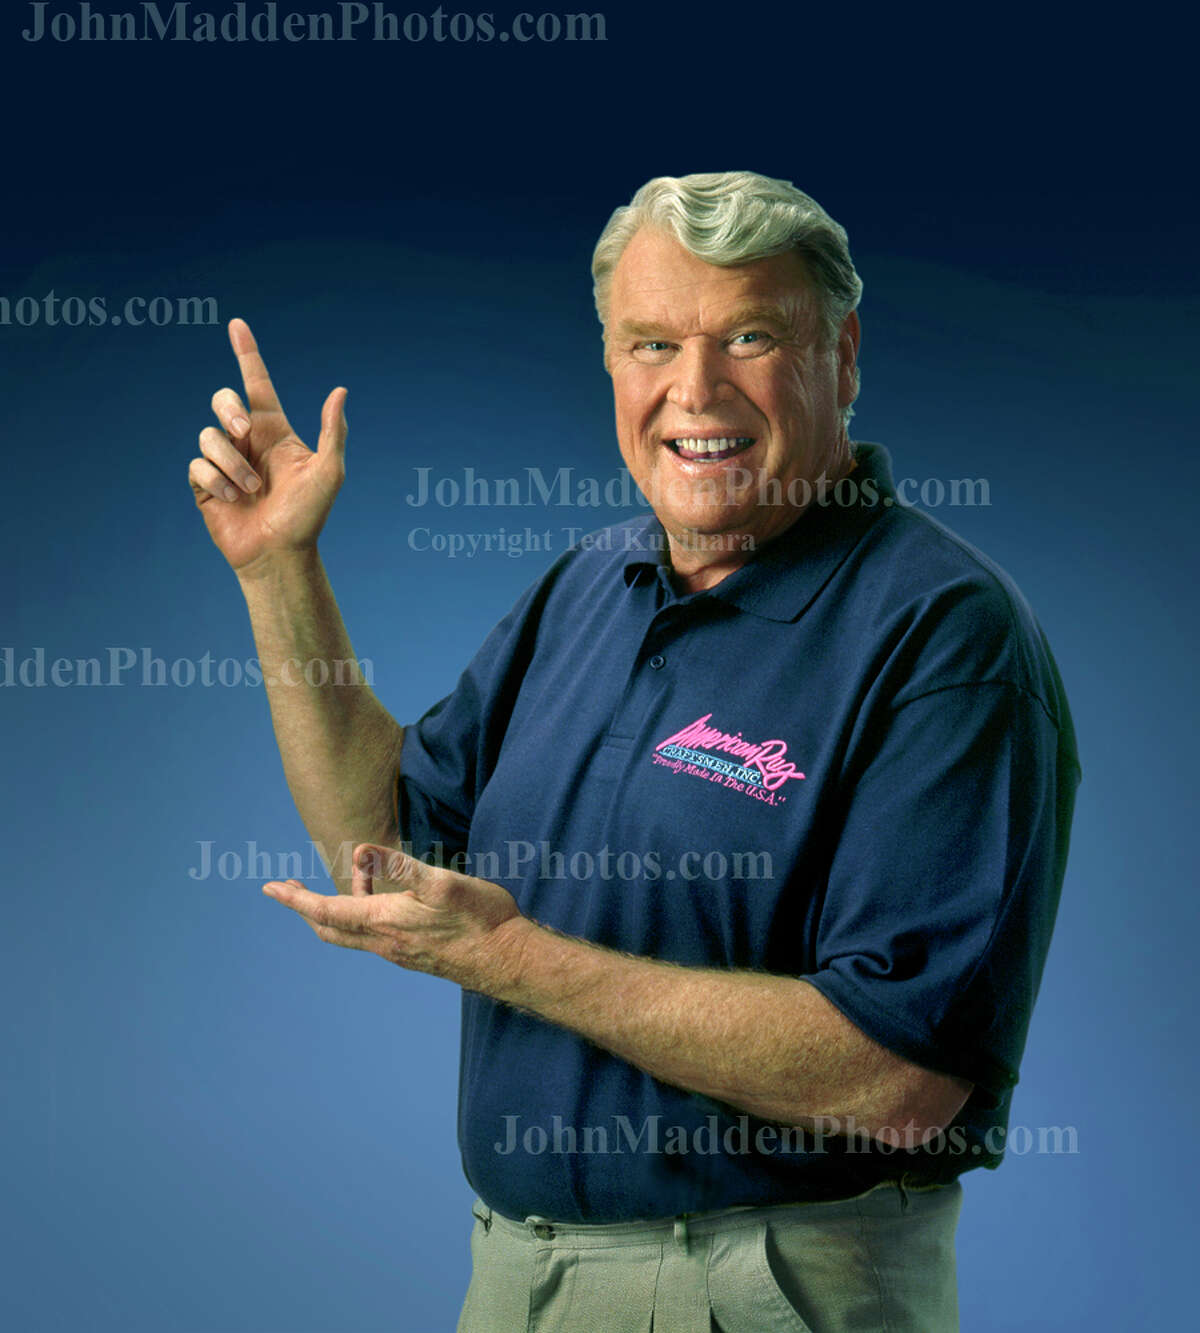 John Madden taking part in one of his many 90s photo shoots orchestrated by Ted Kurihara, who now owns the JohnMaddenPhotos.com website.